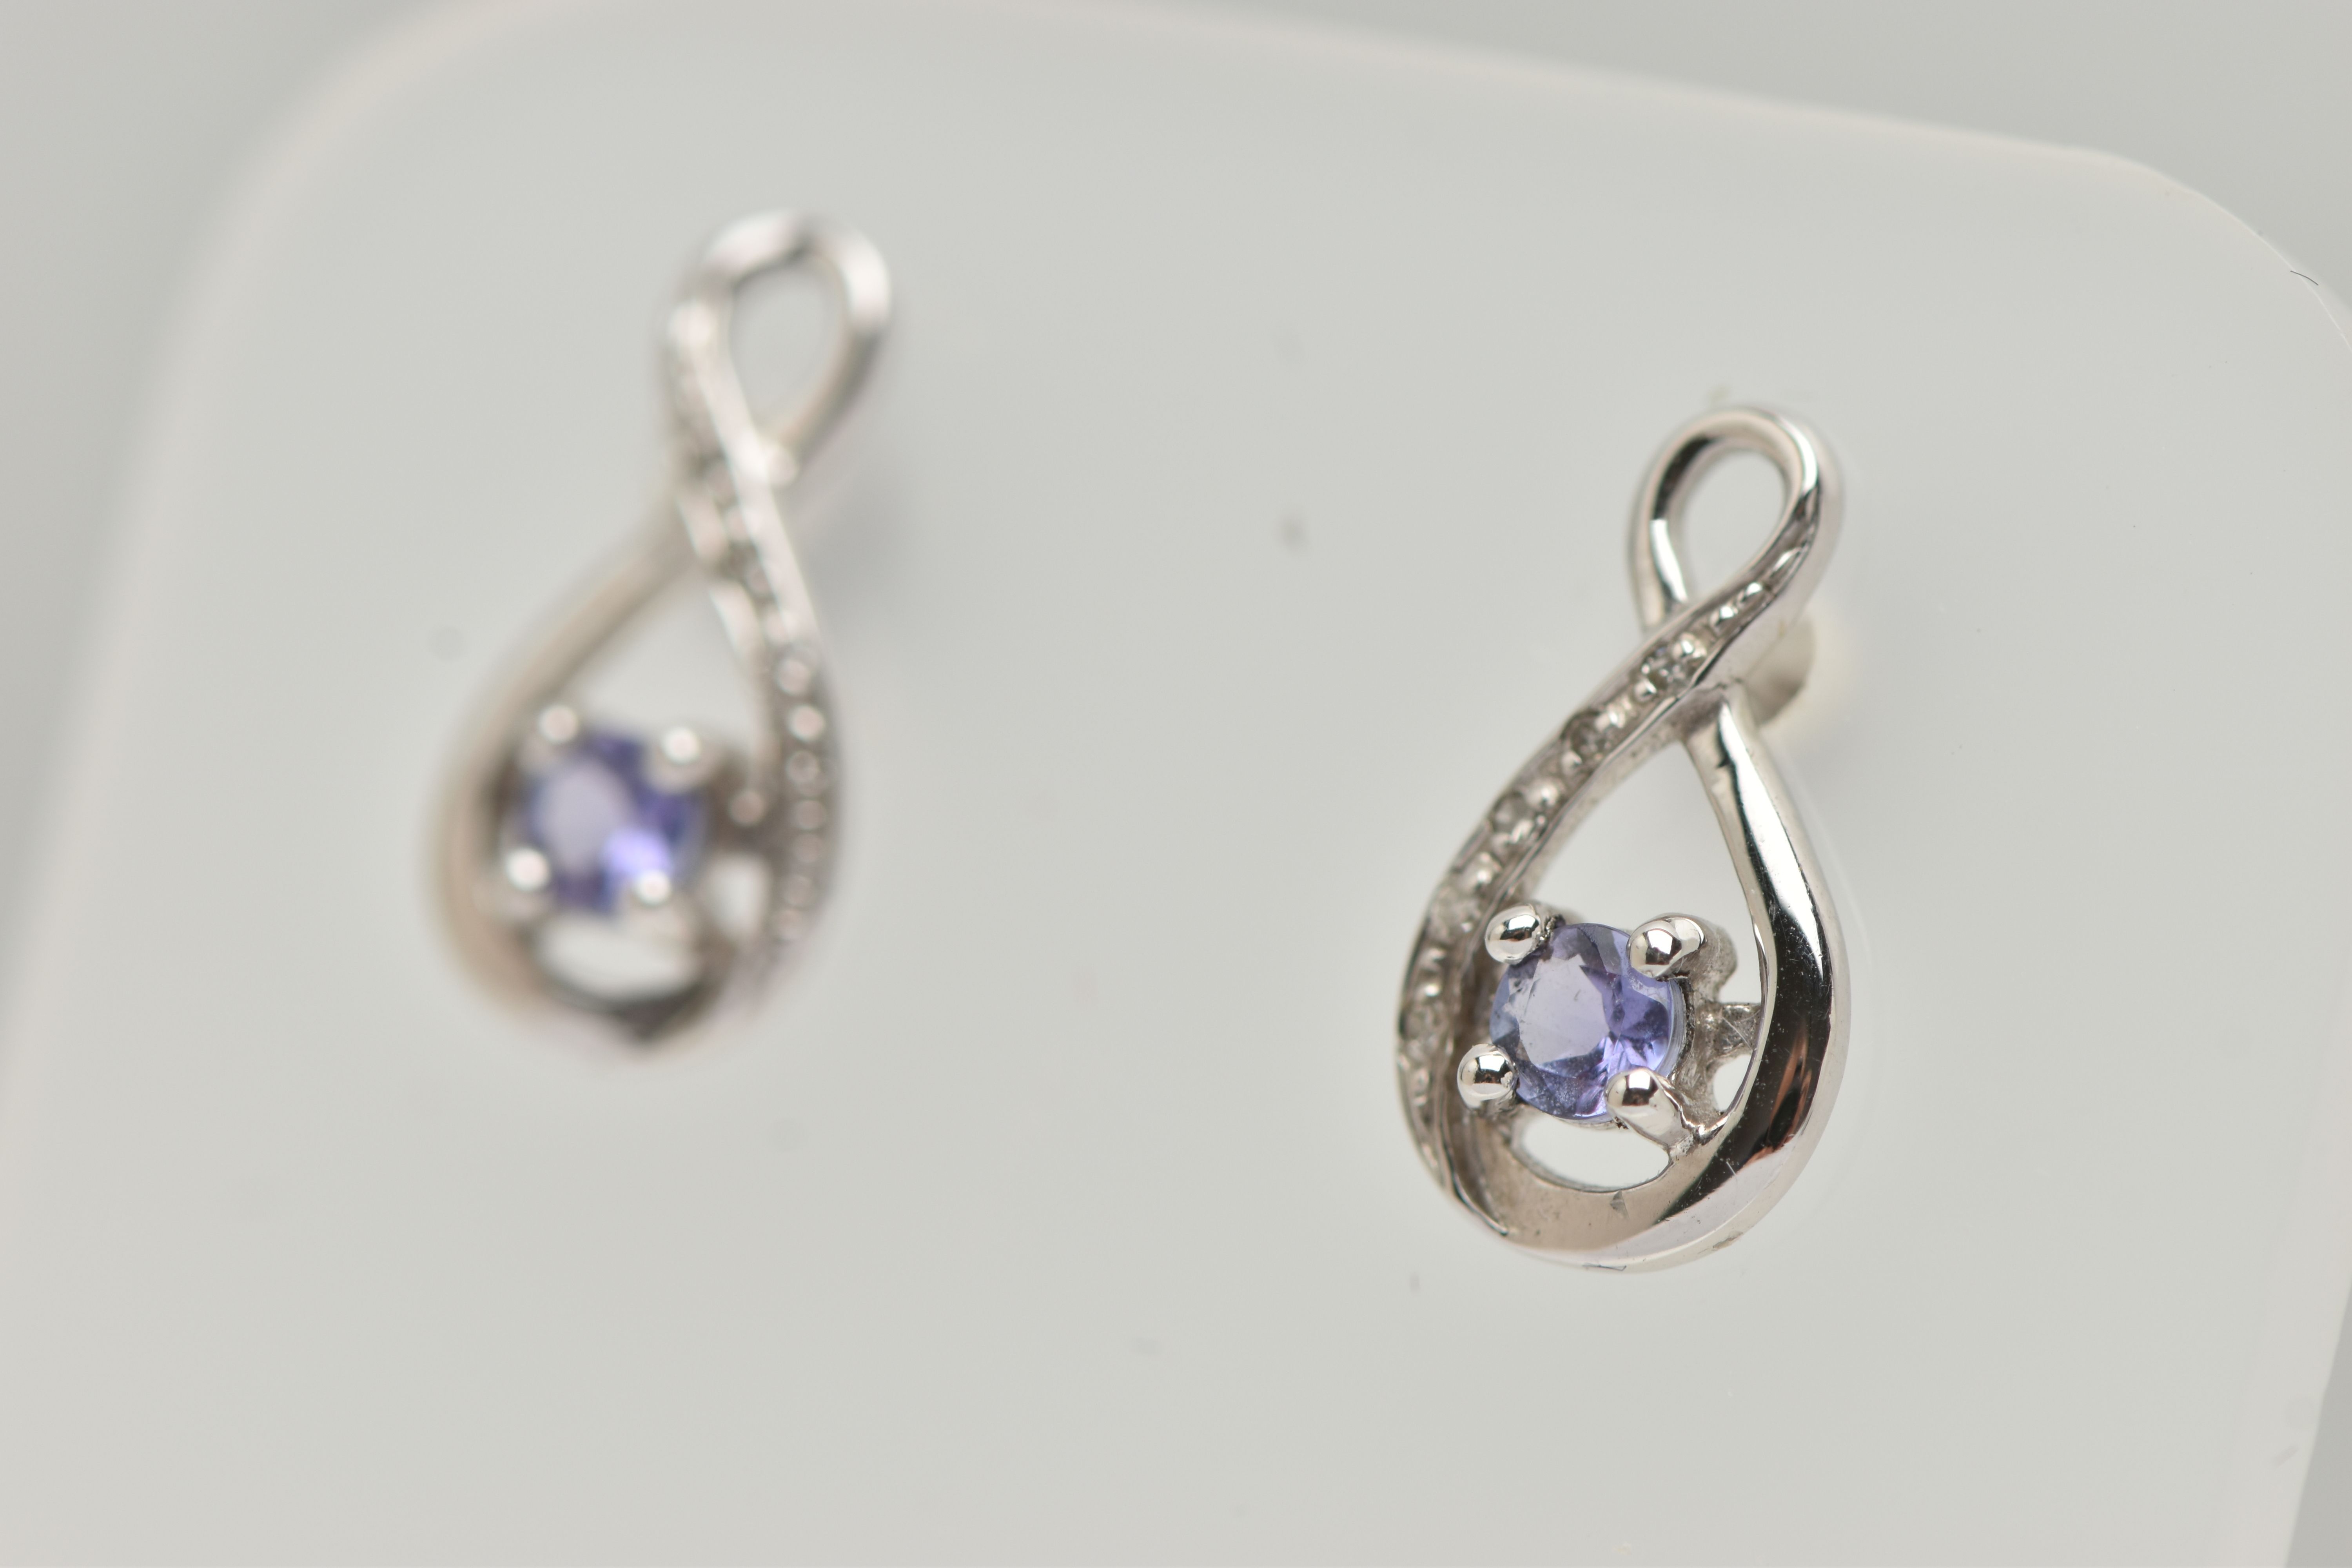 A BOXED PAIR OF 9CT WHITE GOLD TANZANITE AND DIAMOND SET EARRINGS, each earring set with a small - Bild 3 aus 3